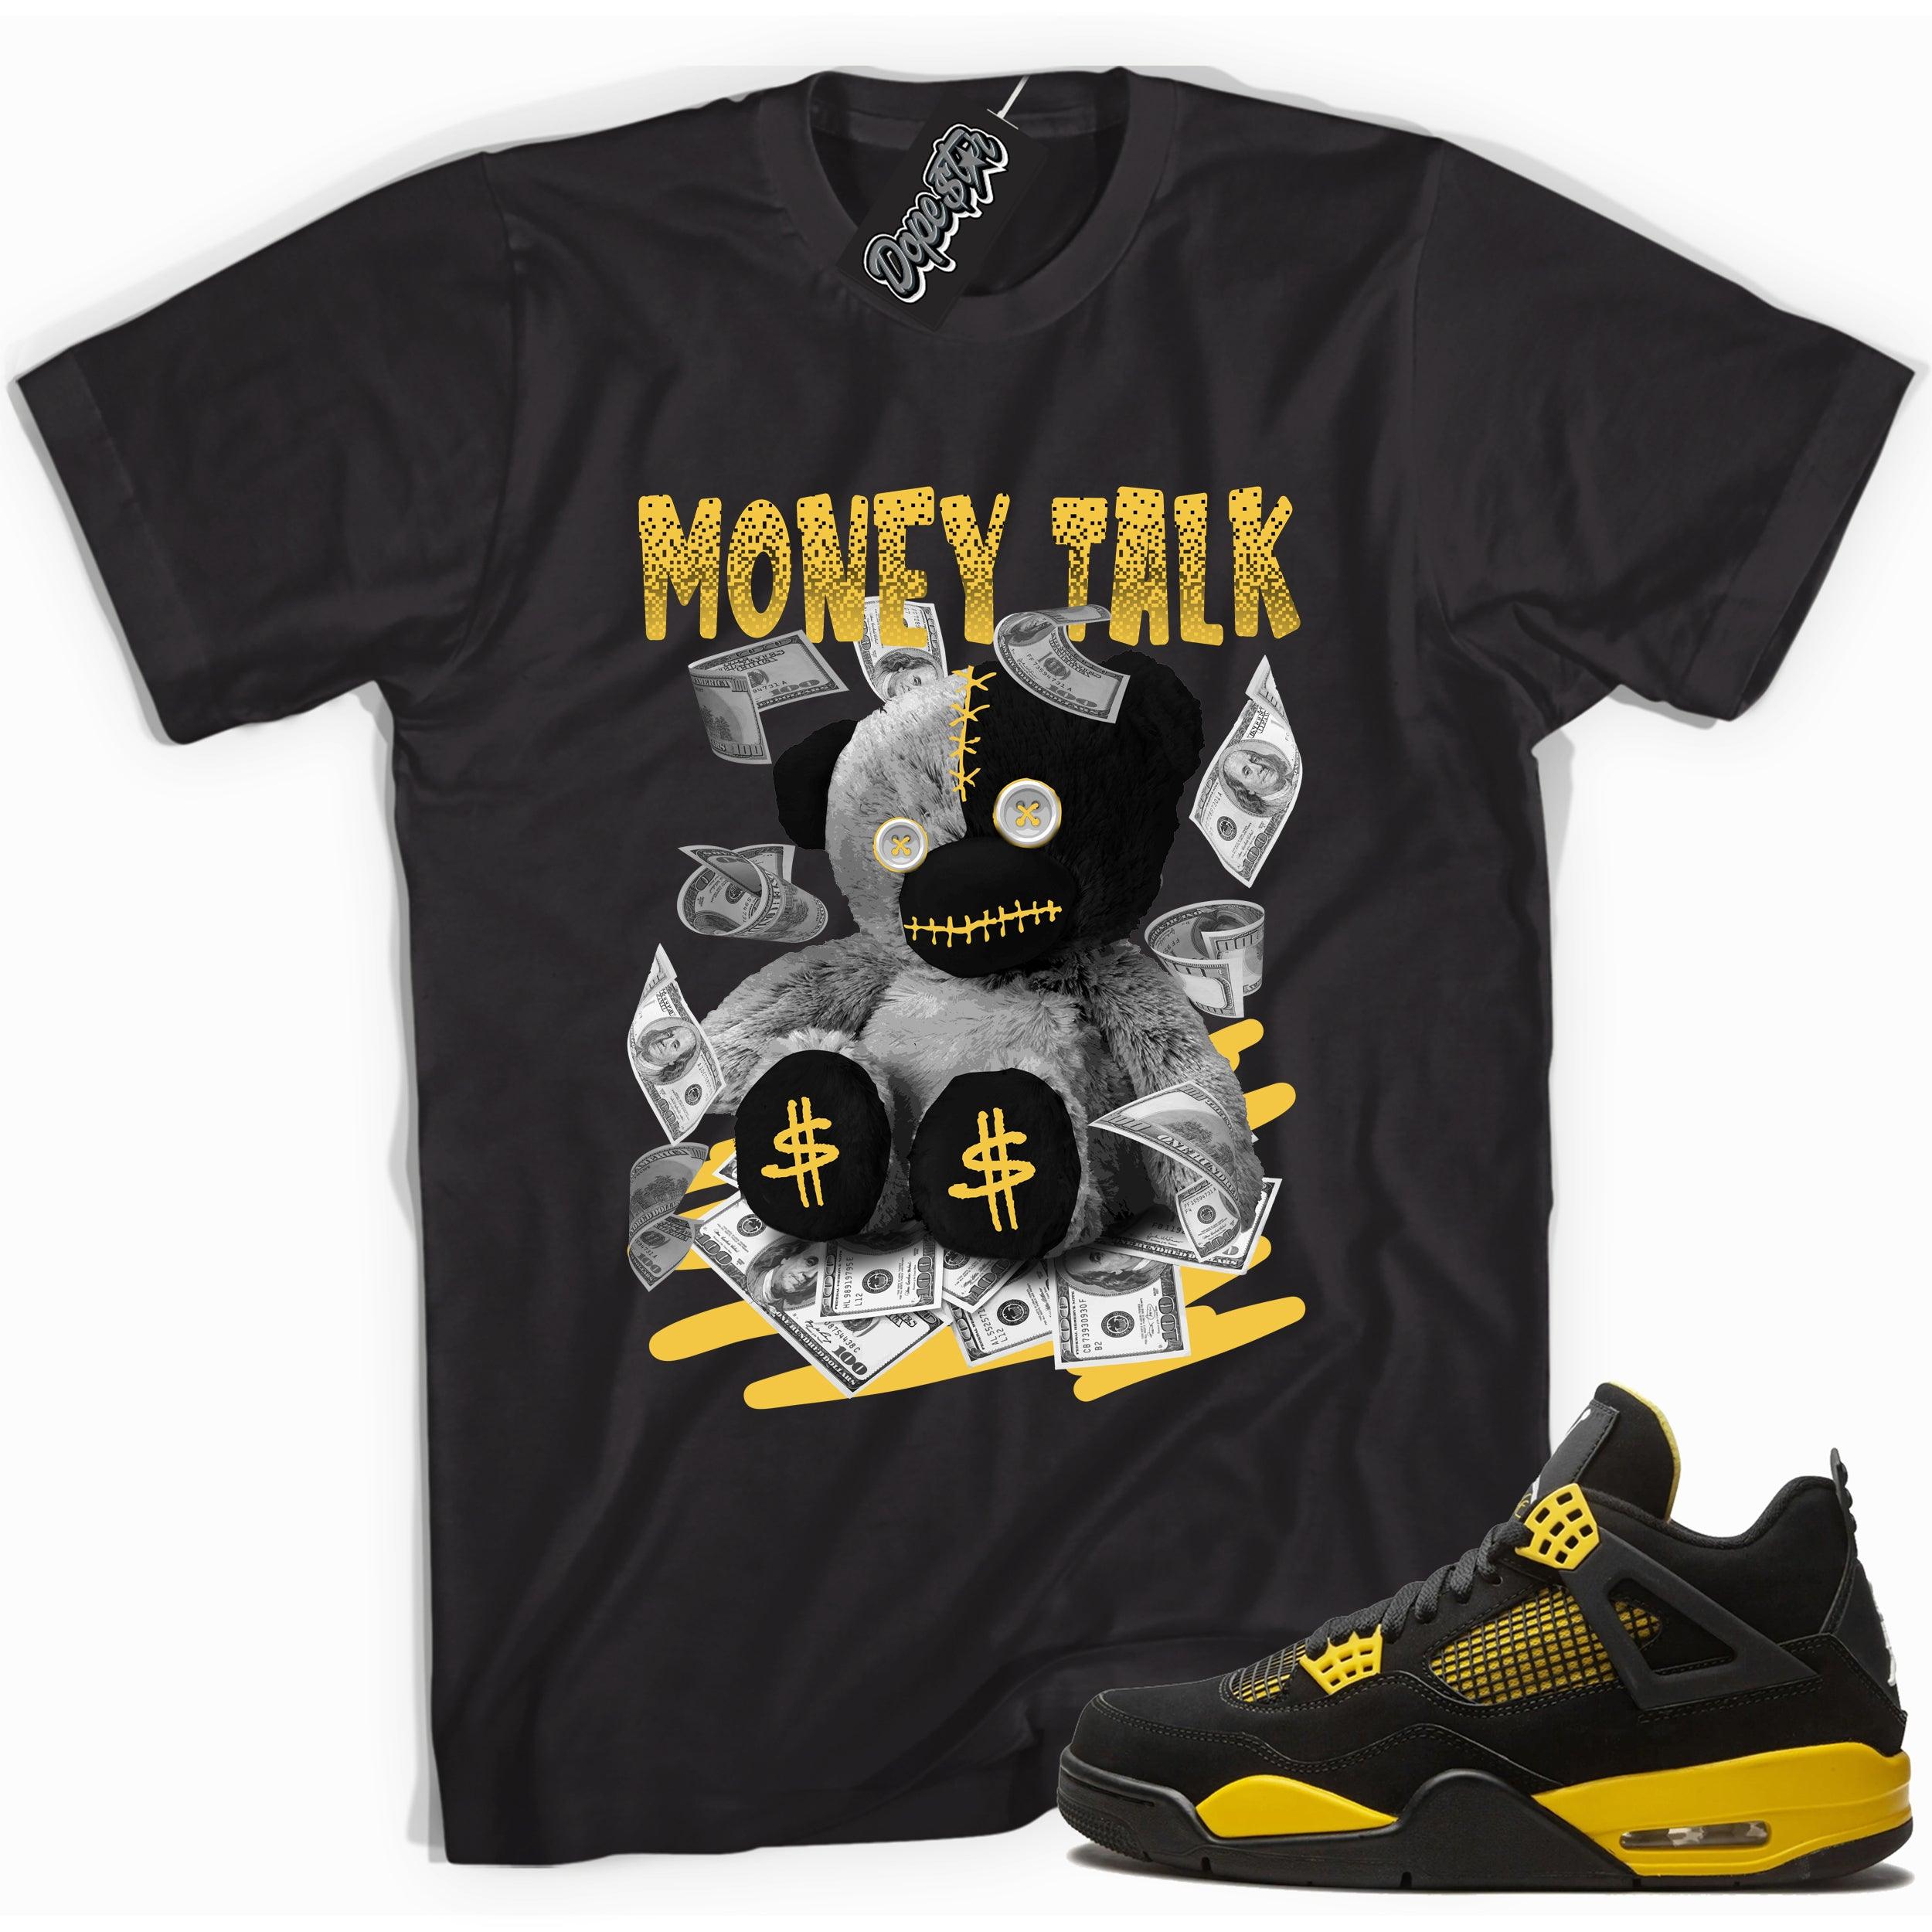 Cool black graphic tee with 'money talk bear' print, that perfectly matches  Air Jordan 4 Thunder sneakers